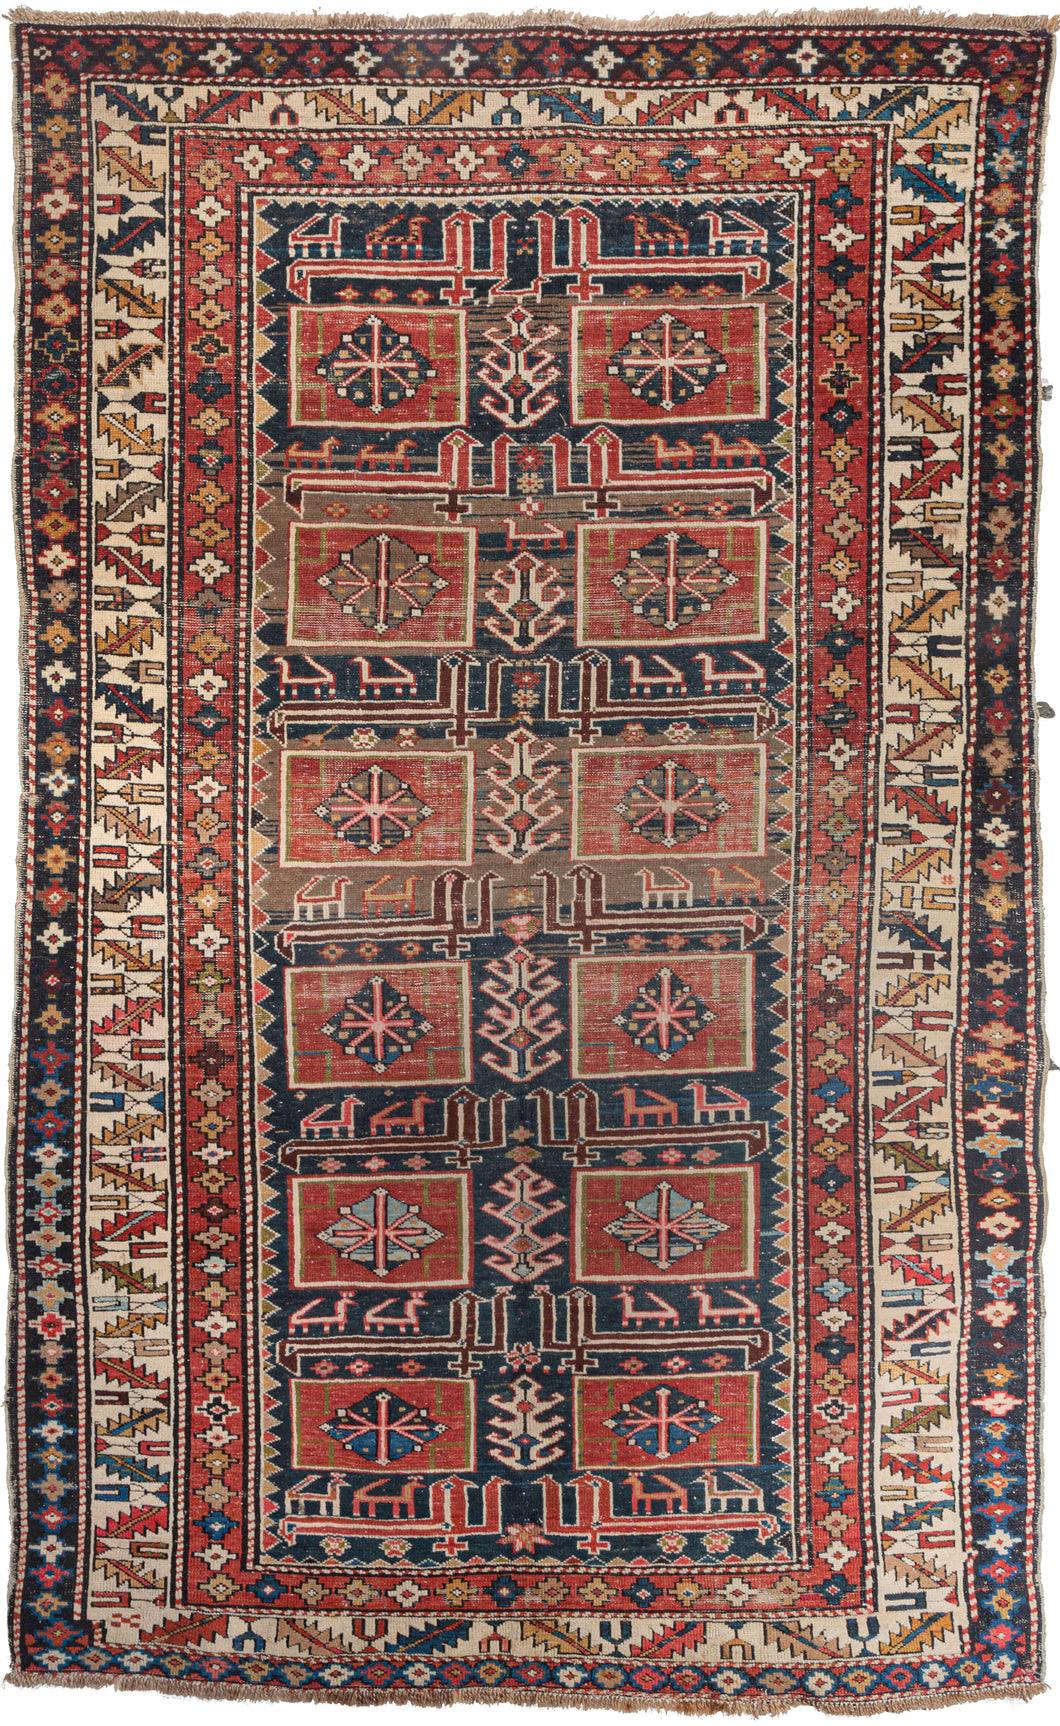 Antique Caucasian area rug featuring a geometric design of small medallions in diagonal columns surrounded by a colorful ivory border. Reds, greens, oranges, and blues are contrasted with cream and brown wool. 